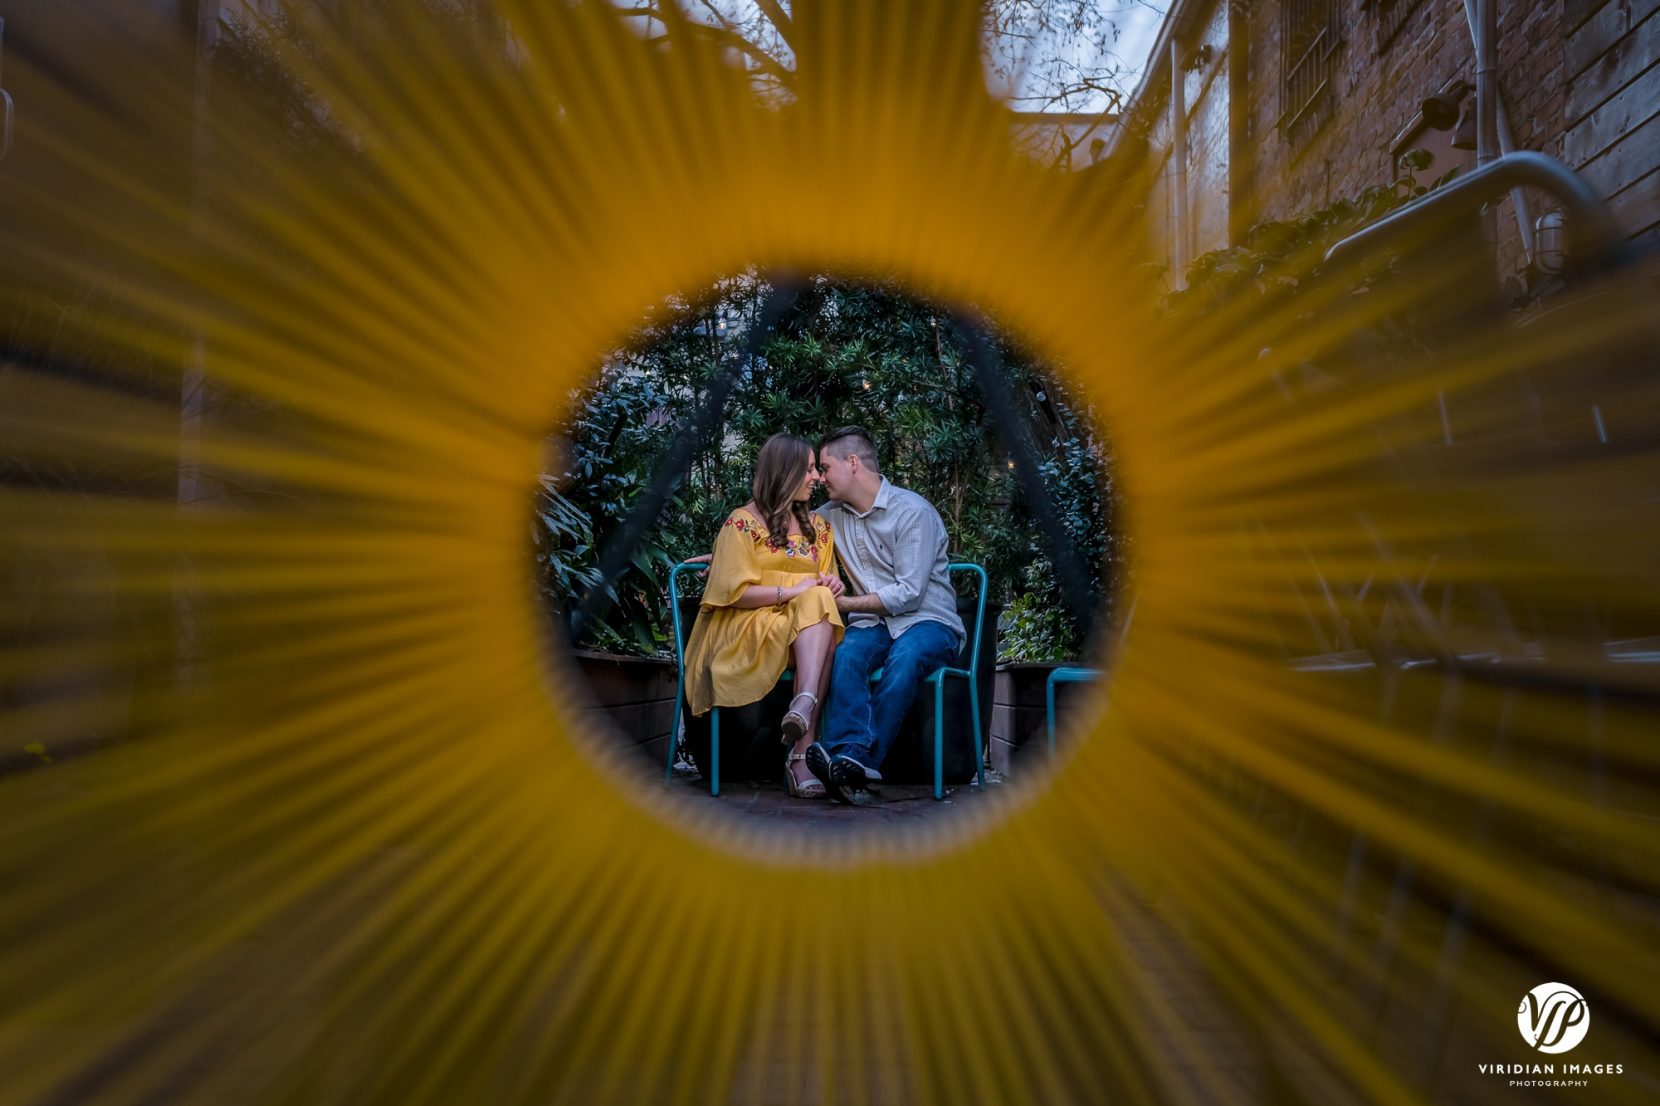 couple cuddle together photographed through chair decor